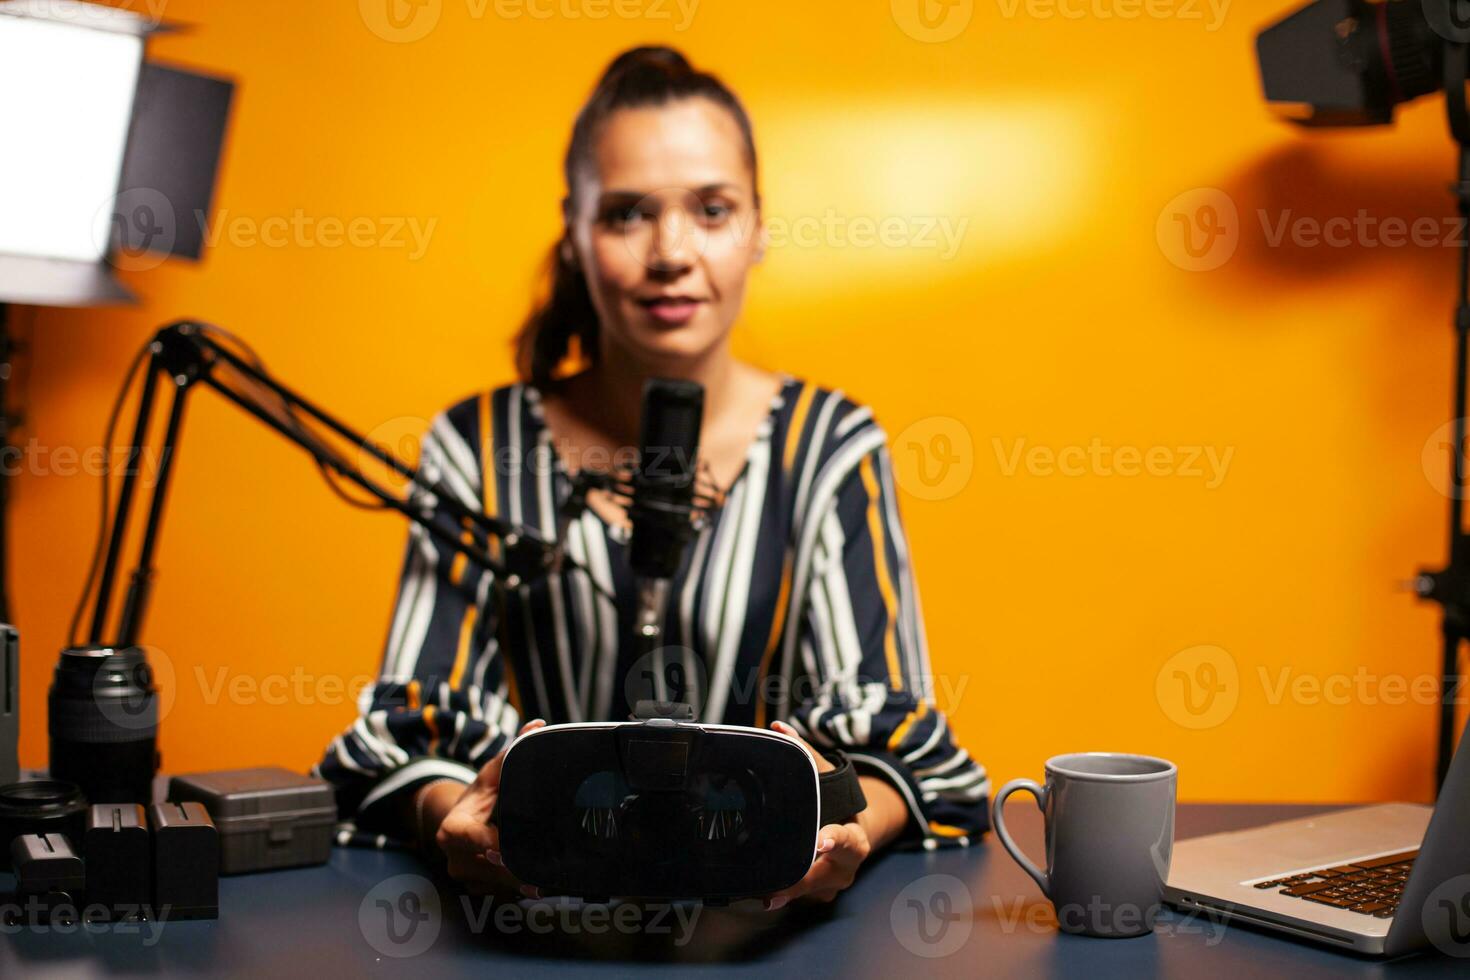 Woman holding headset while recording video blog in home studio. Video blog studio review of weareble technology with stereoscopic cyber reality, electronics gadget experience, gaming industry photo